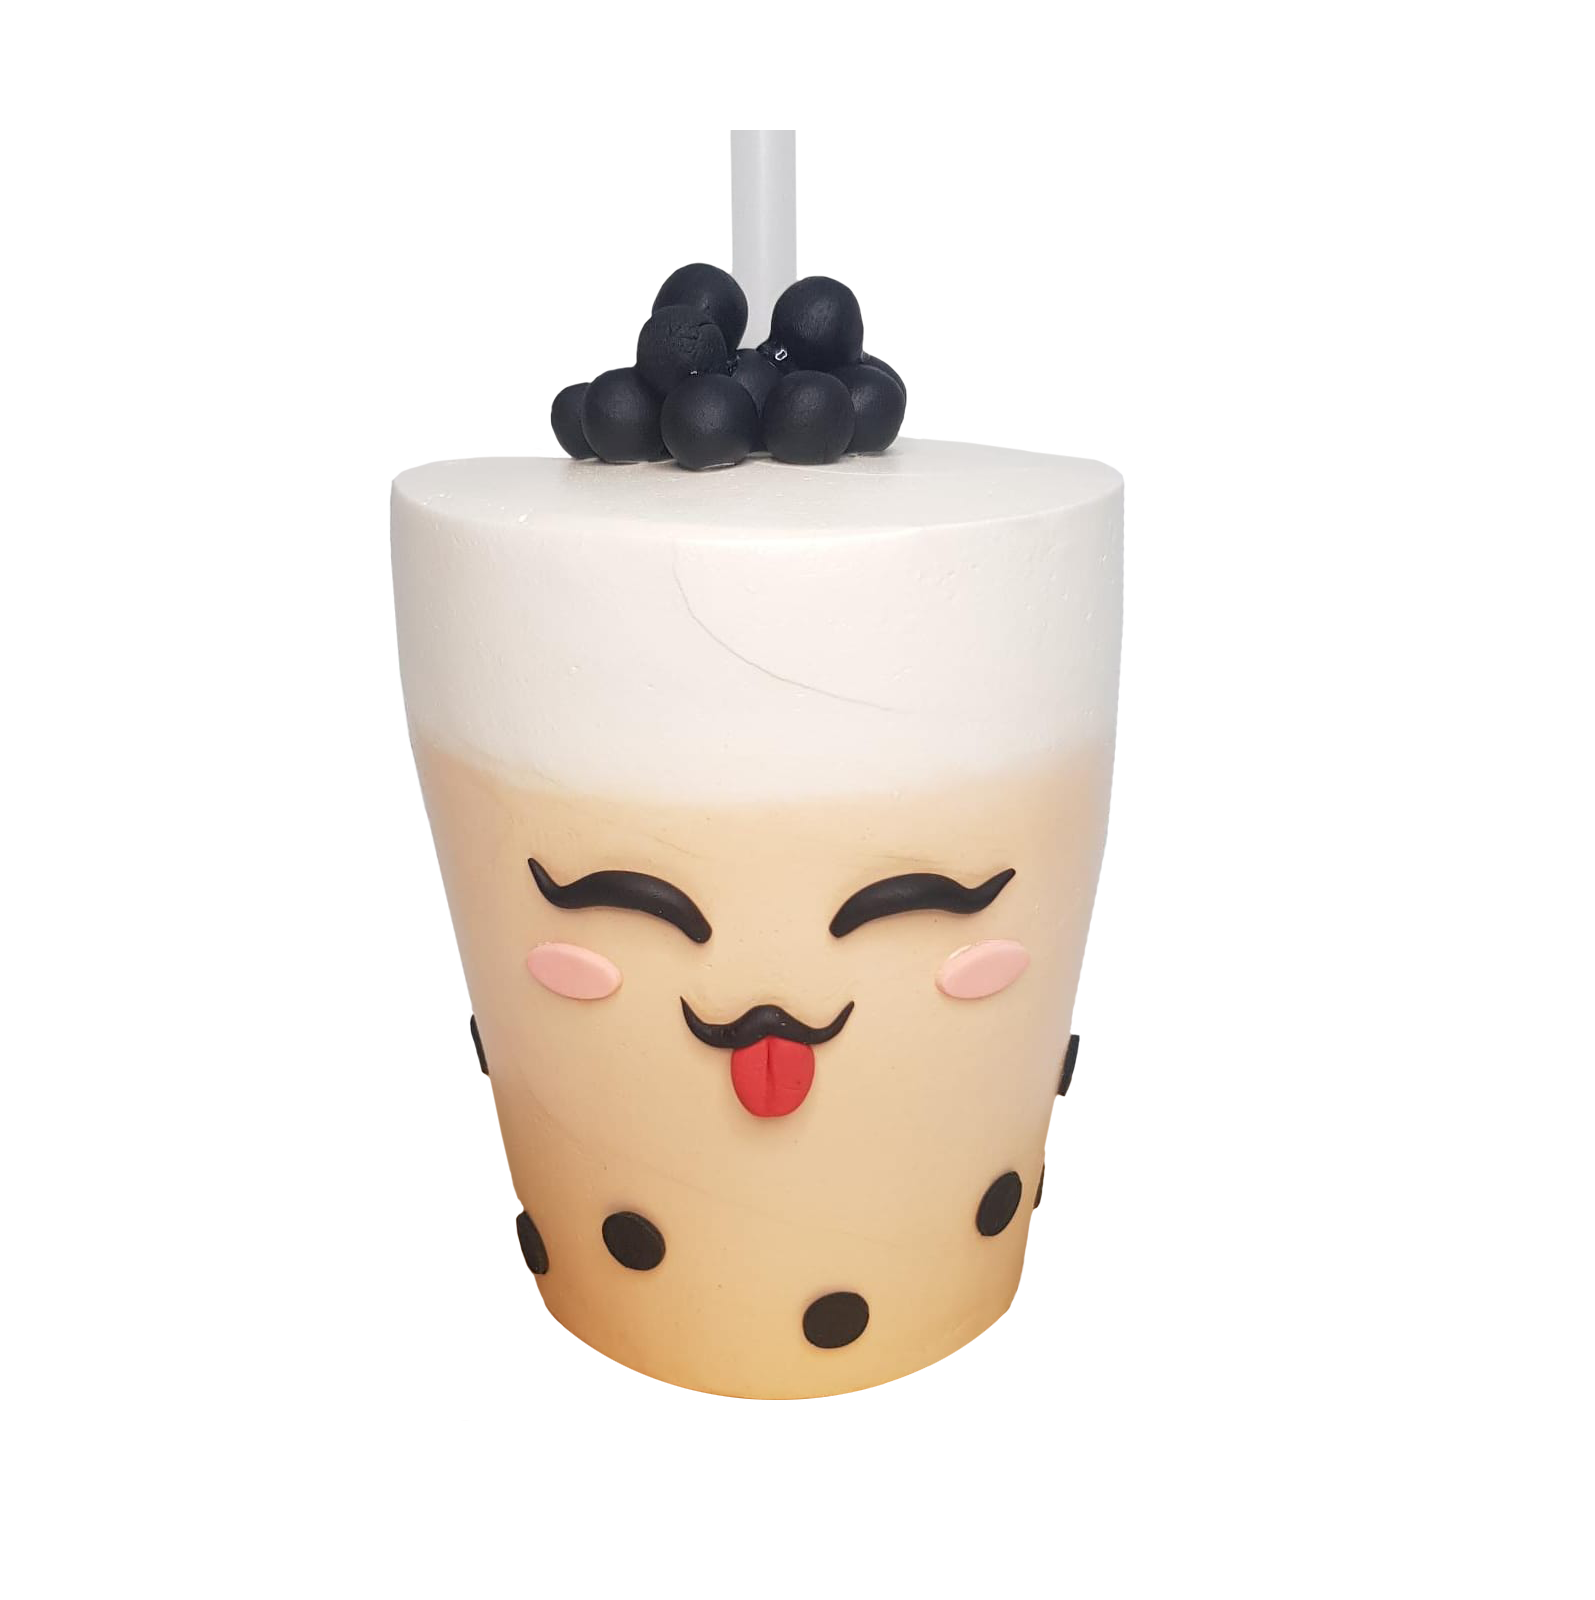 Real Bubble Tea Drink in a Cake 5